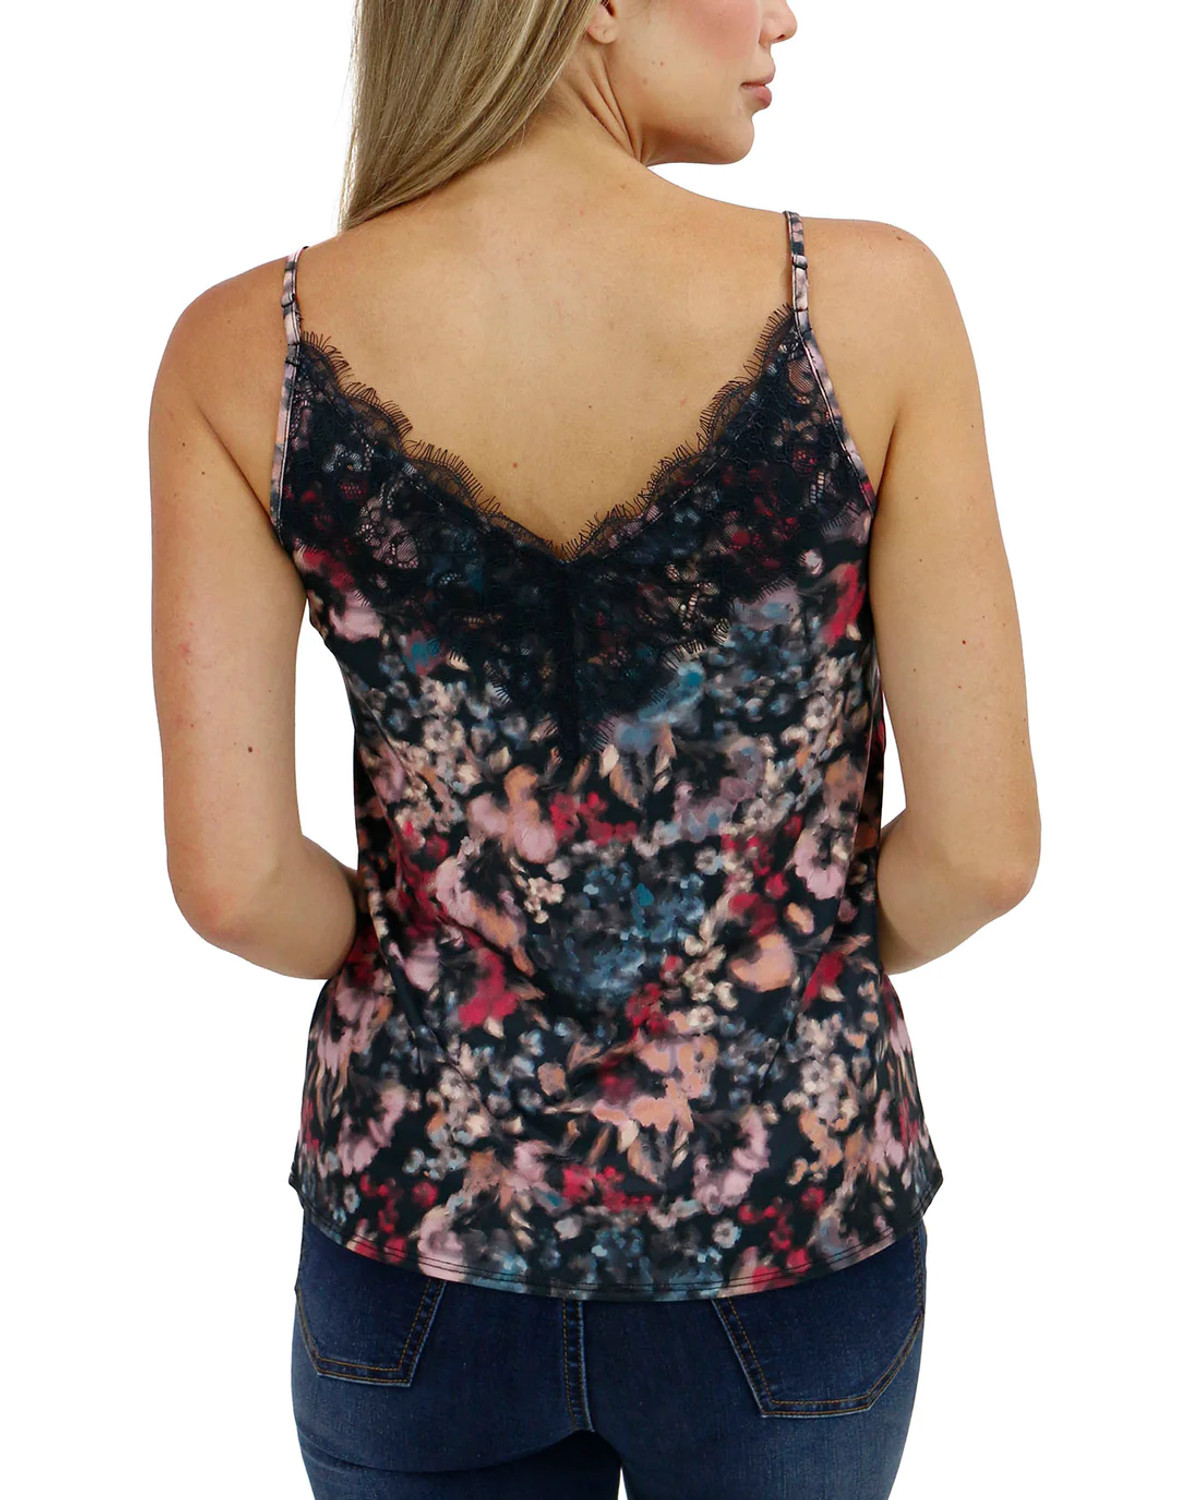 Floral Lace Trimmed Ribbon Accented Cami Top